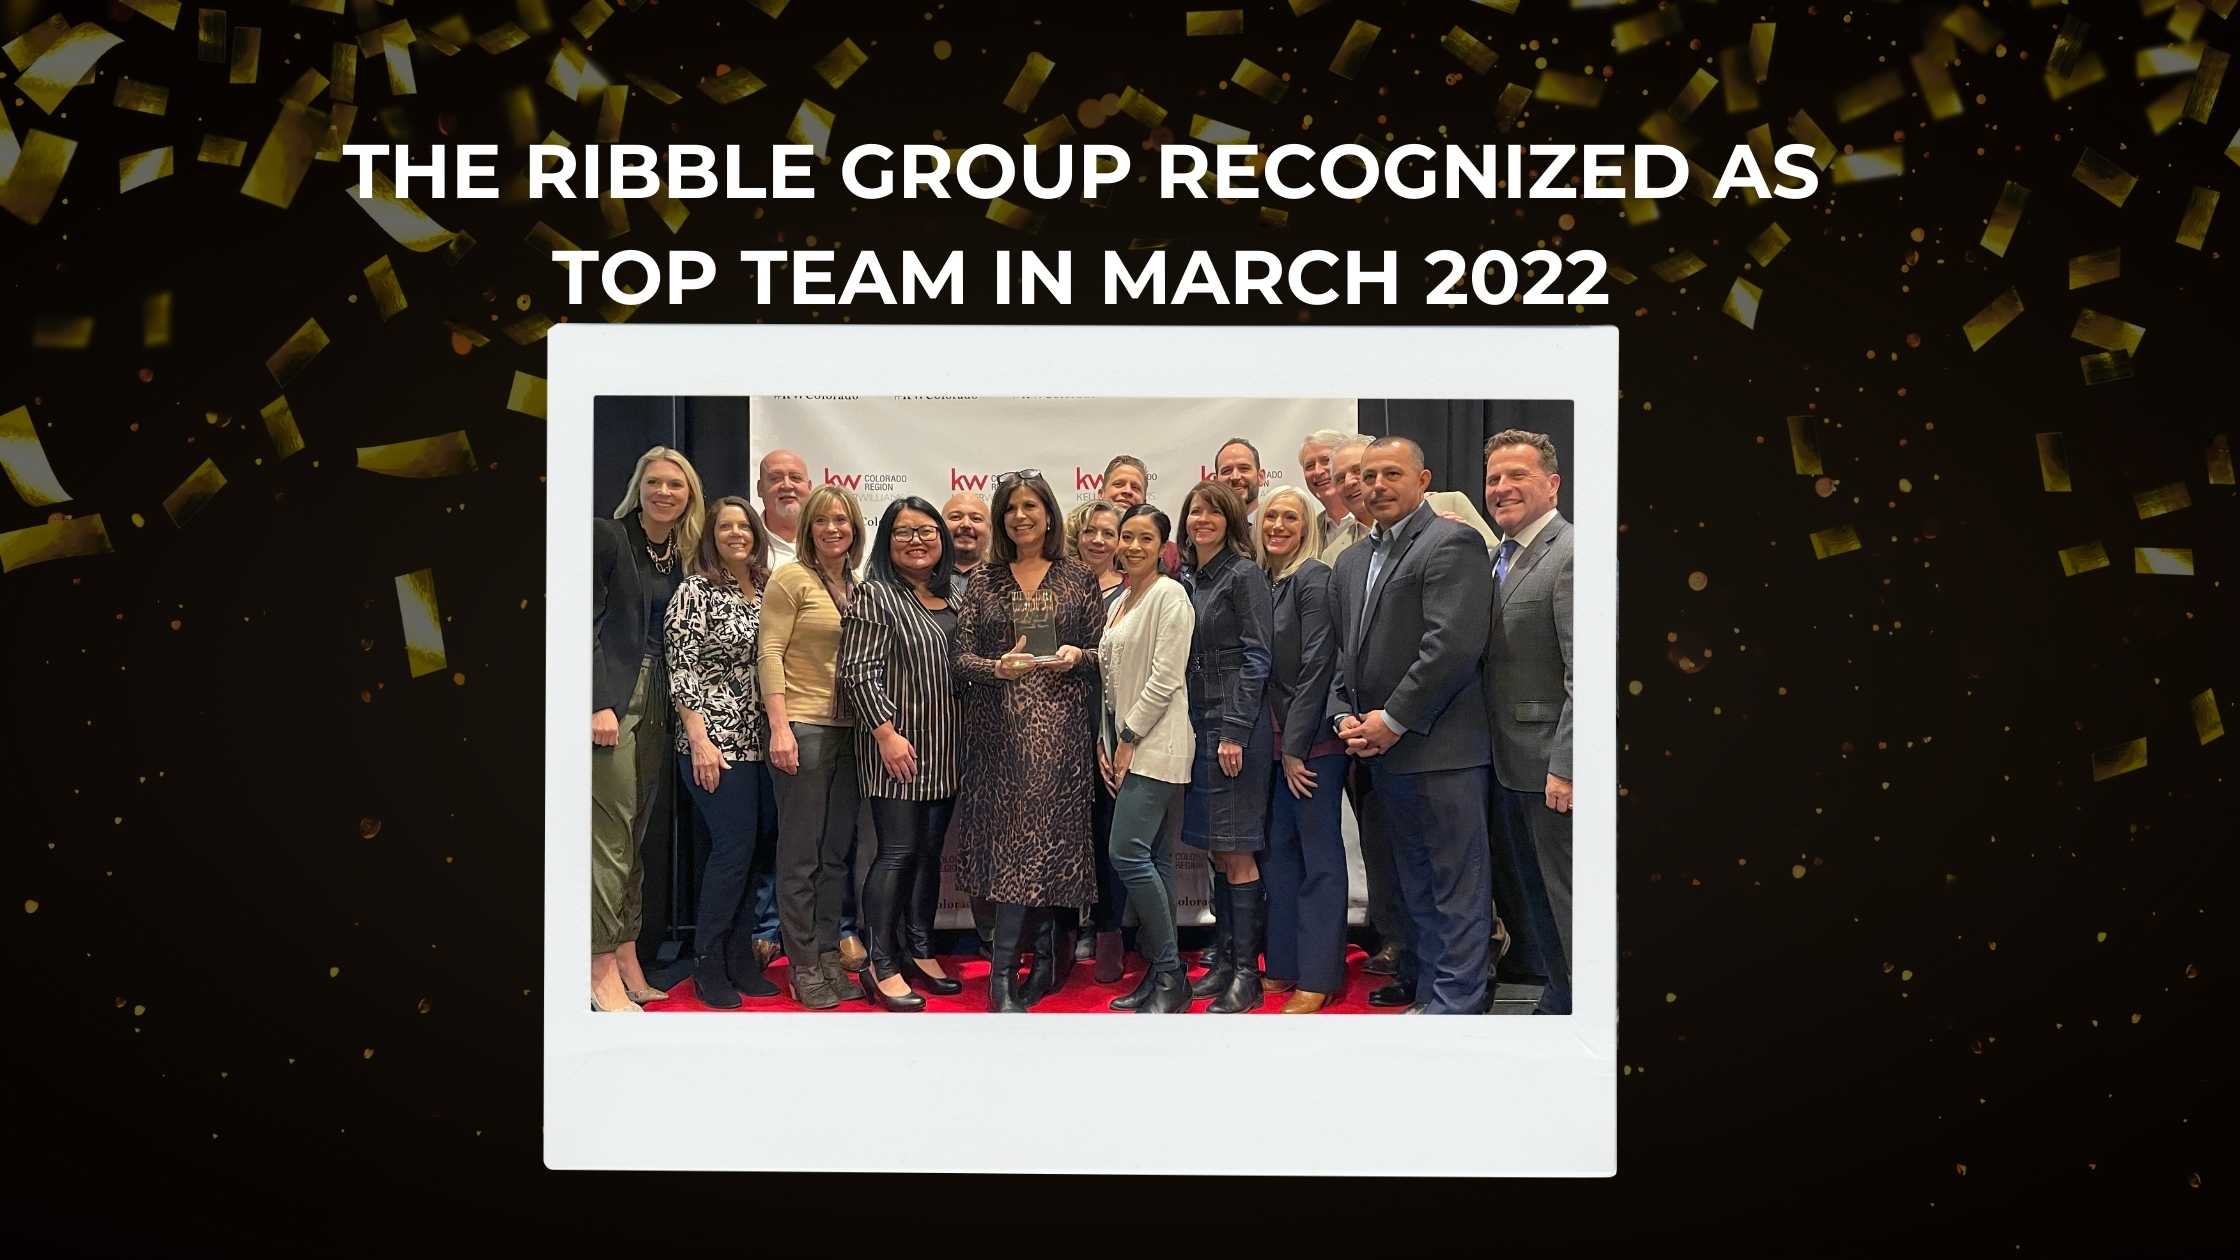 The Ribble Group Is Overwhelmingly The Top Team In March 2022!